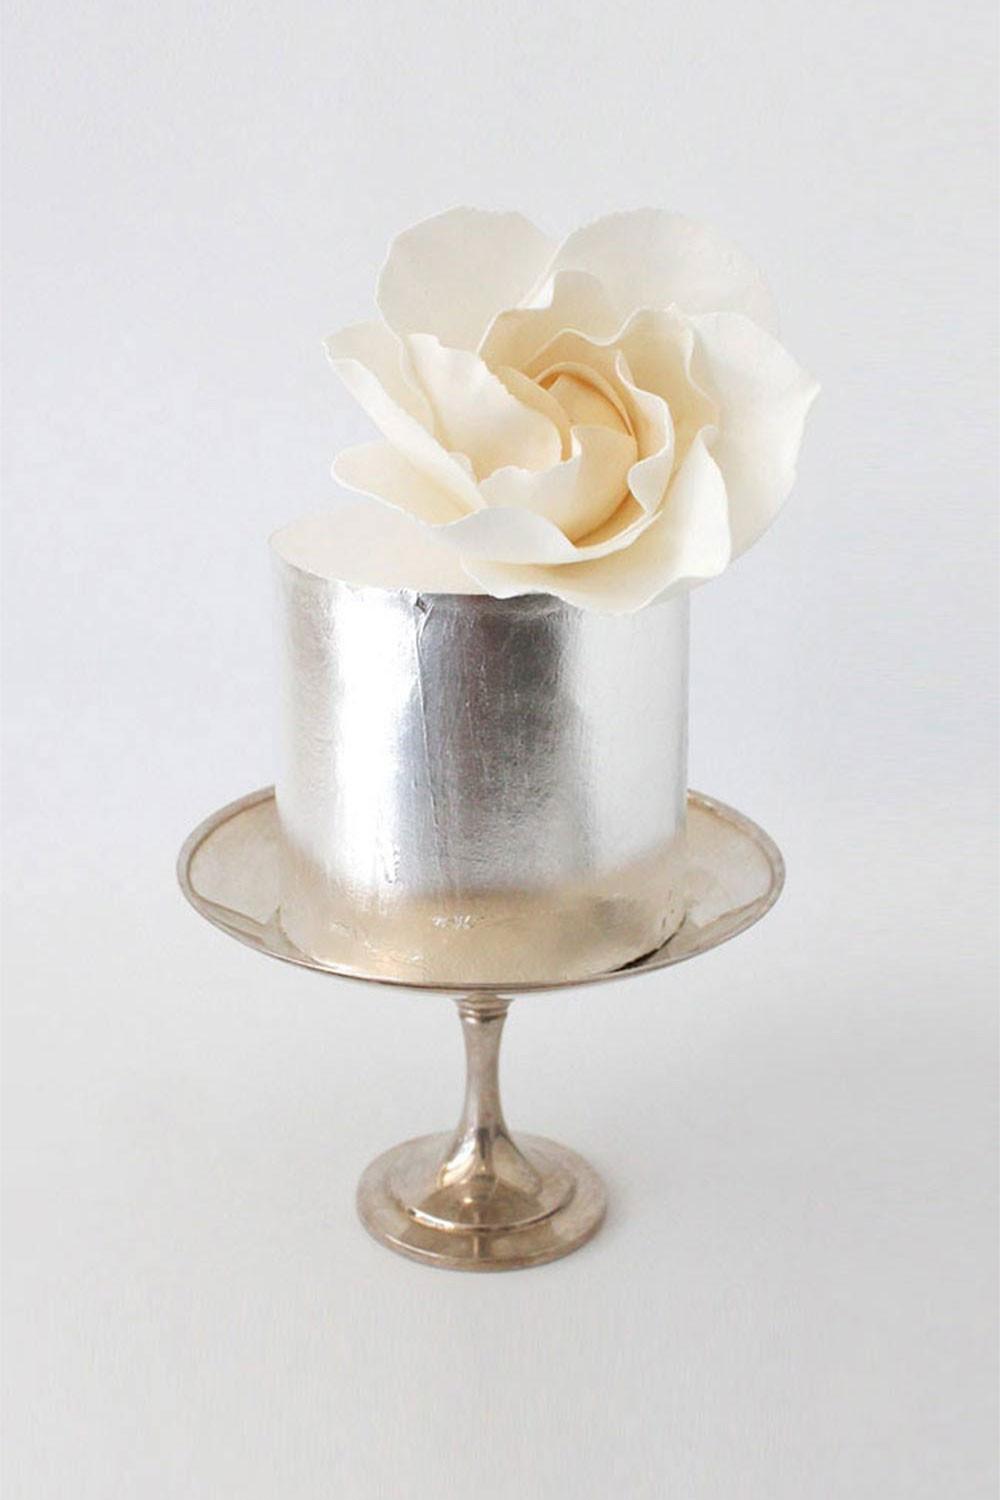 The Most Exquisite Silver Anniversary Cakes - Cake Geek Magazine